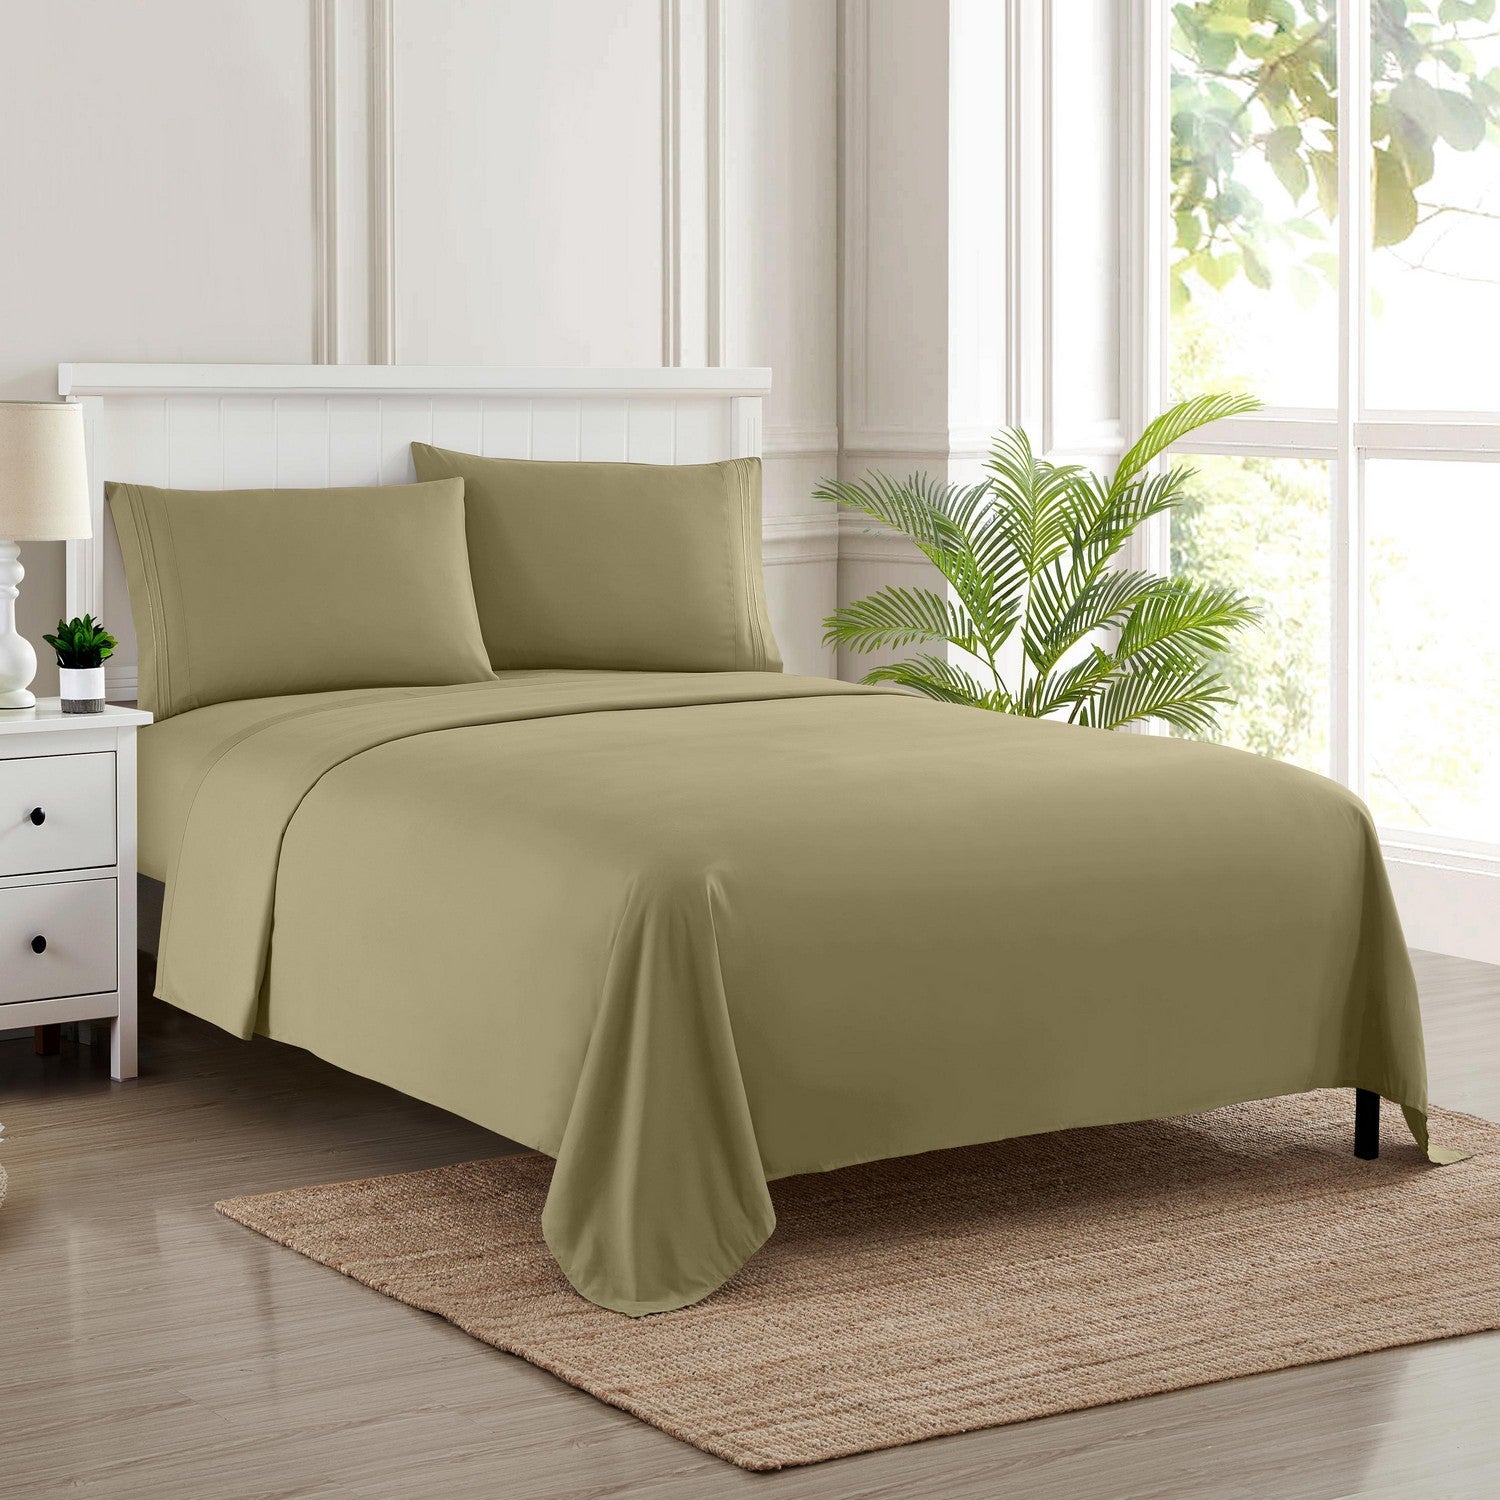 Classic 4-Piece Bed Sheet Set (Sage) - Bed